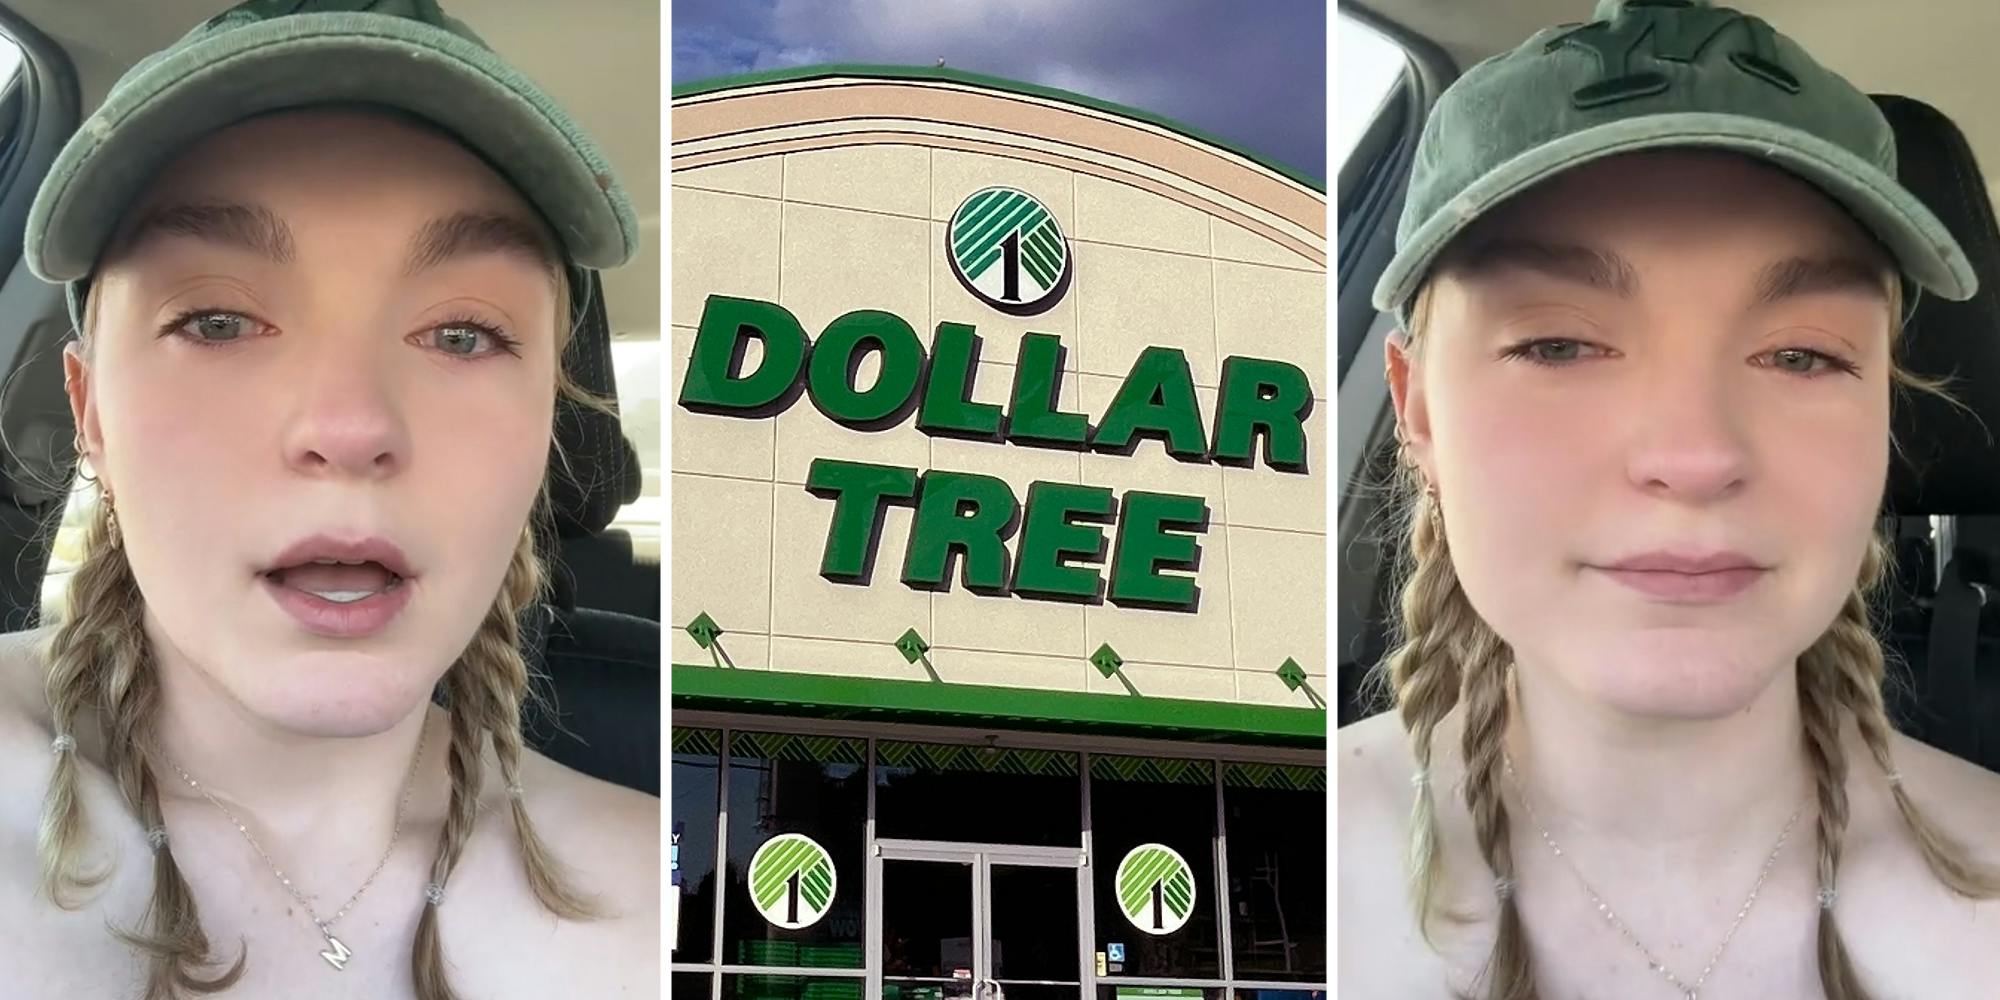 ‘You guys are mentally ill’: Woman says Dollar Tree worker called her ‘sick in the head’ after she told her she’s getting married